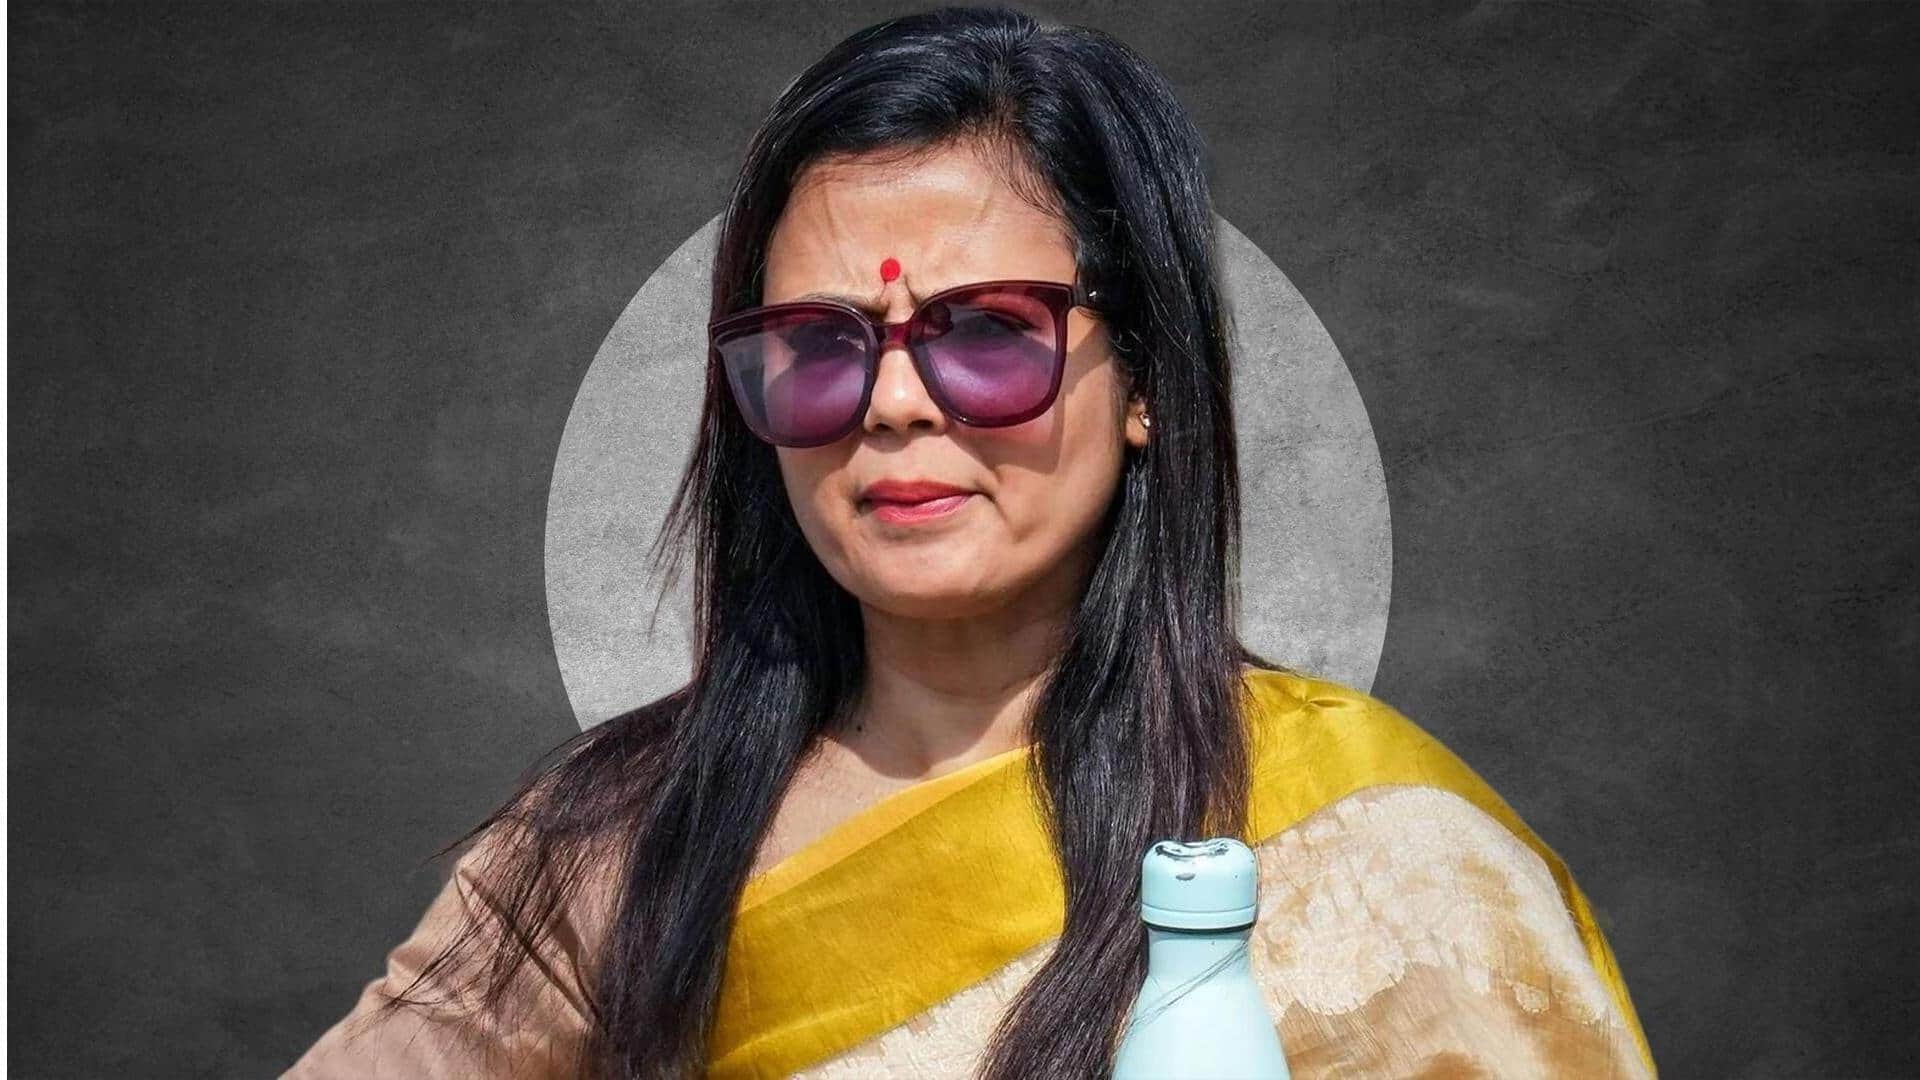 Cash-for-query case: Mahua Moitra to appear before parliamentary panel today